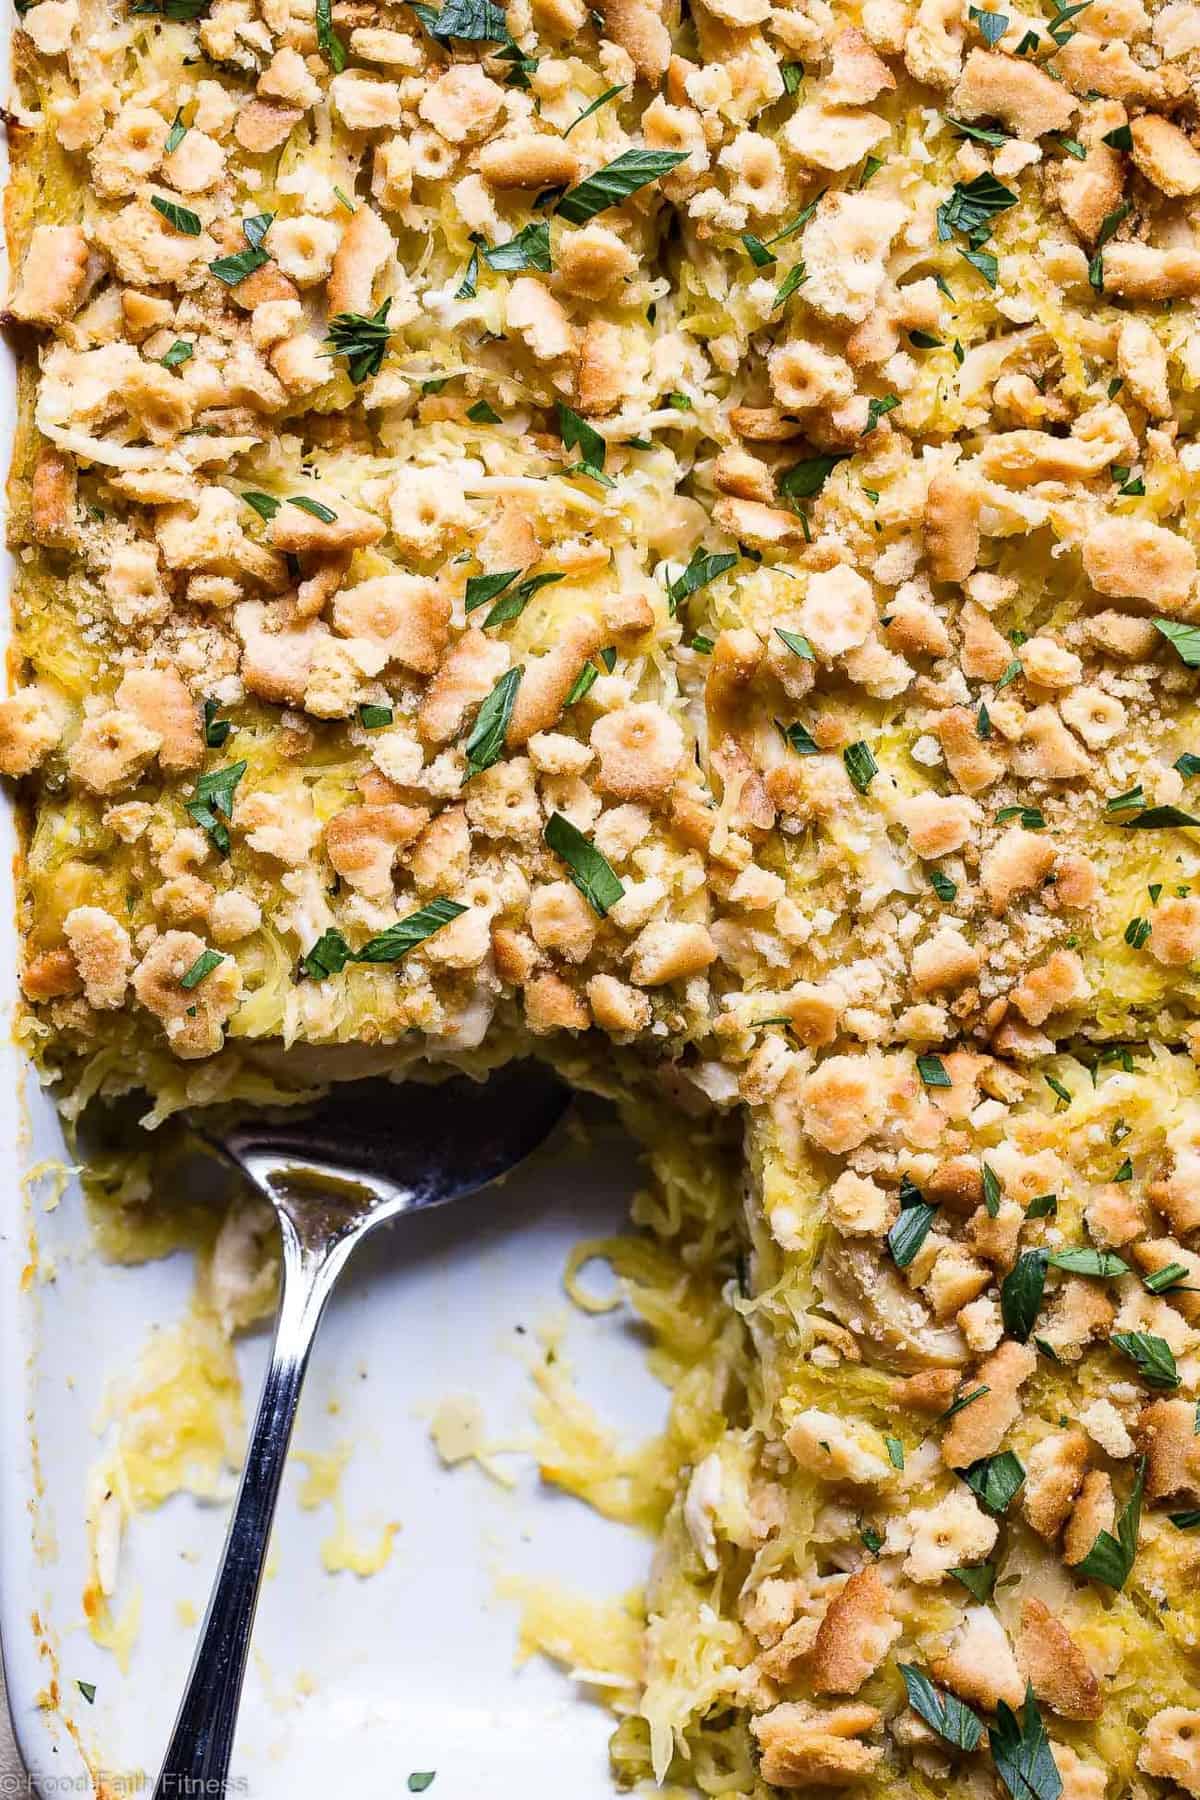 Healthy Chicken "Noodle" Spaghetti Squash Casserole -Â This Healthy Chicken Noodle Casserole uses spaghetti squash so it's gluten free and dairy free! Homemade condensed chicken soup makes it SO creamy! The best healthy comfort food! | #Foodfaithfitness | #Glutenfree #Healthy #Dairyfree #Spaghettisquash #Casserole